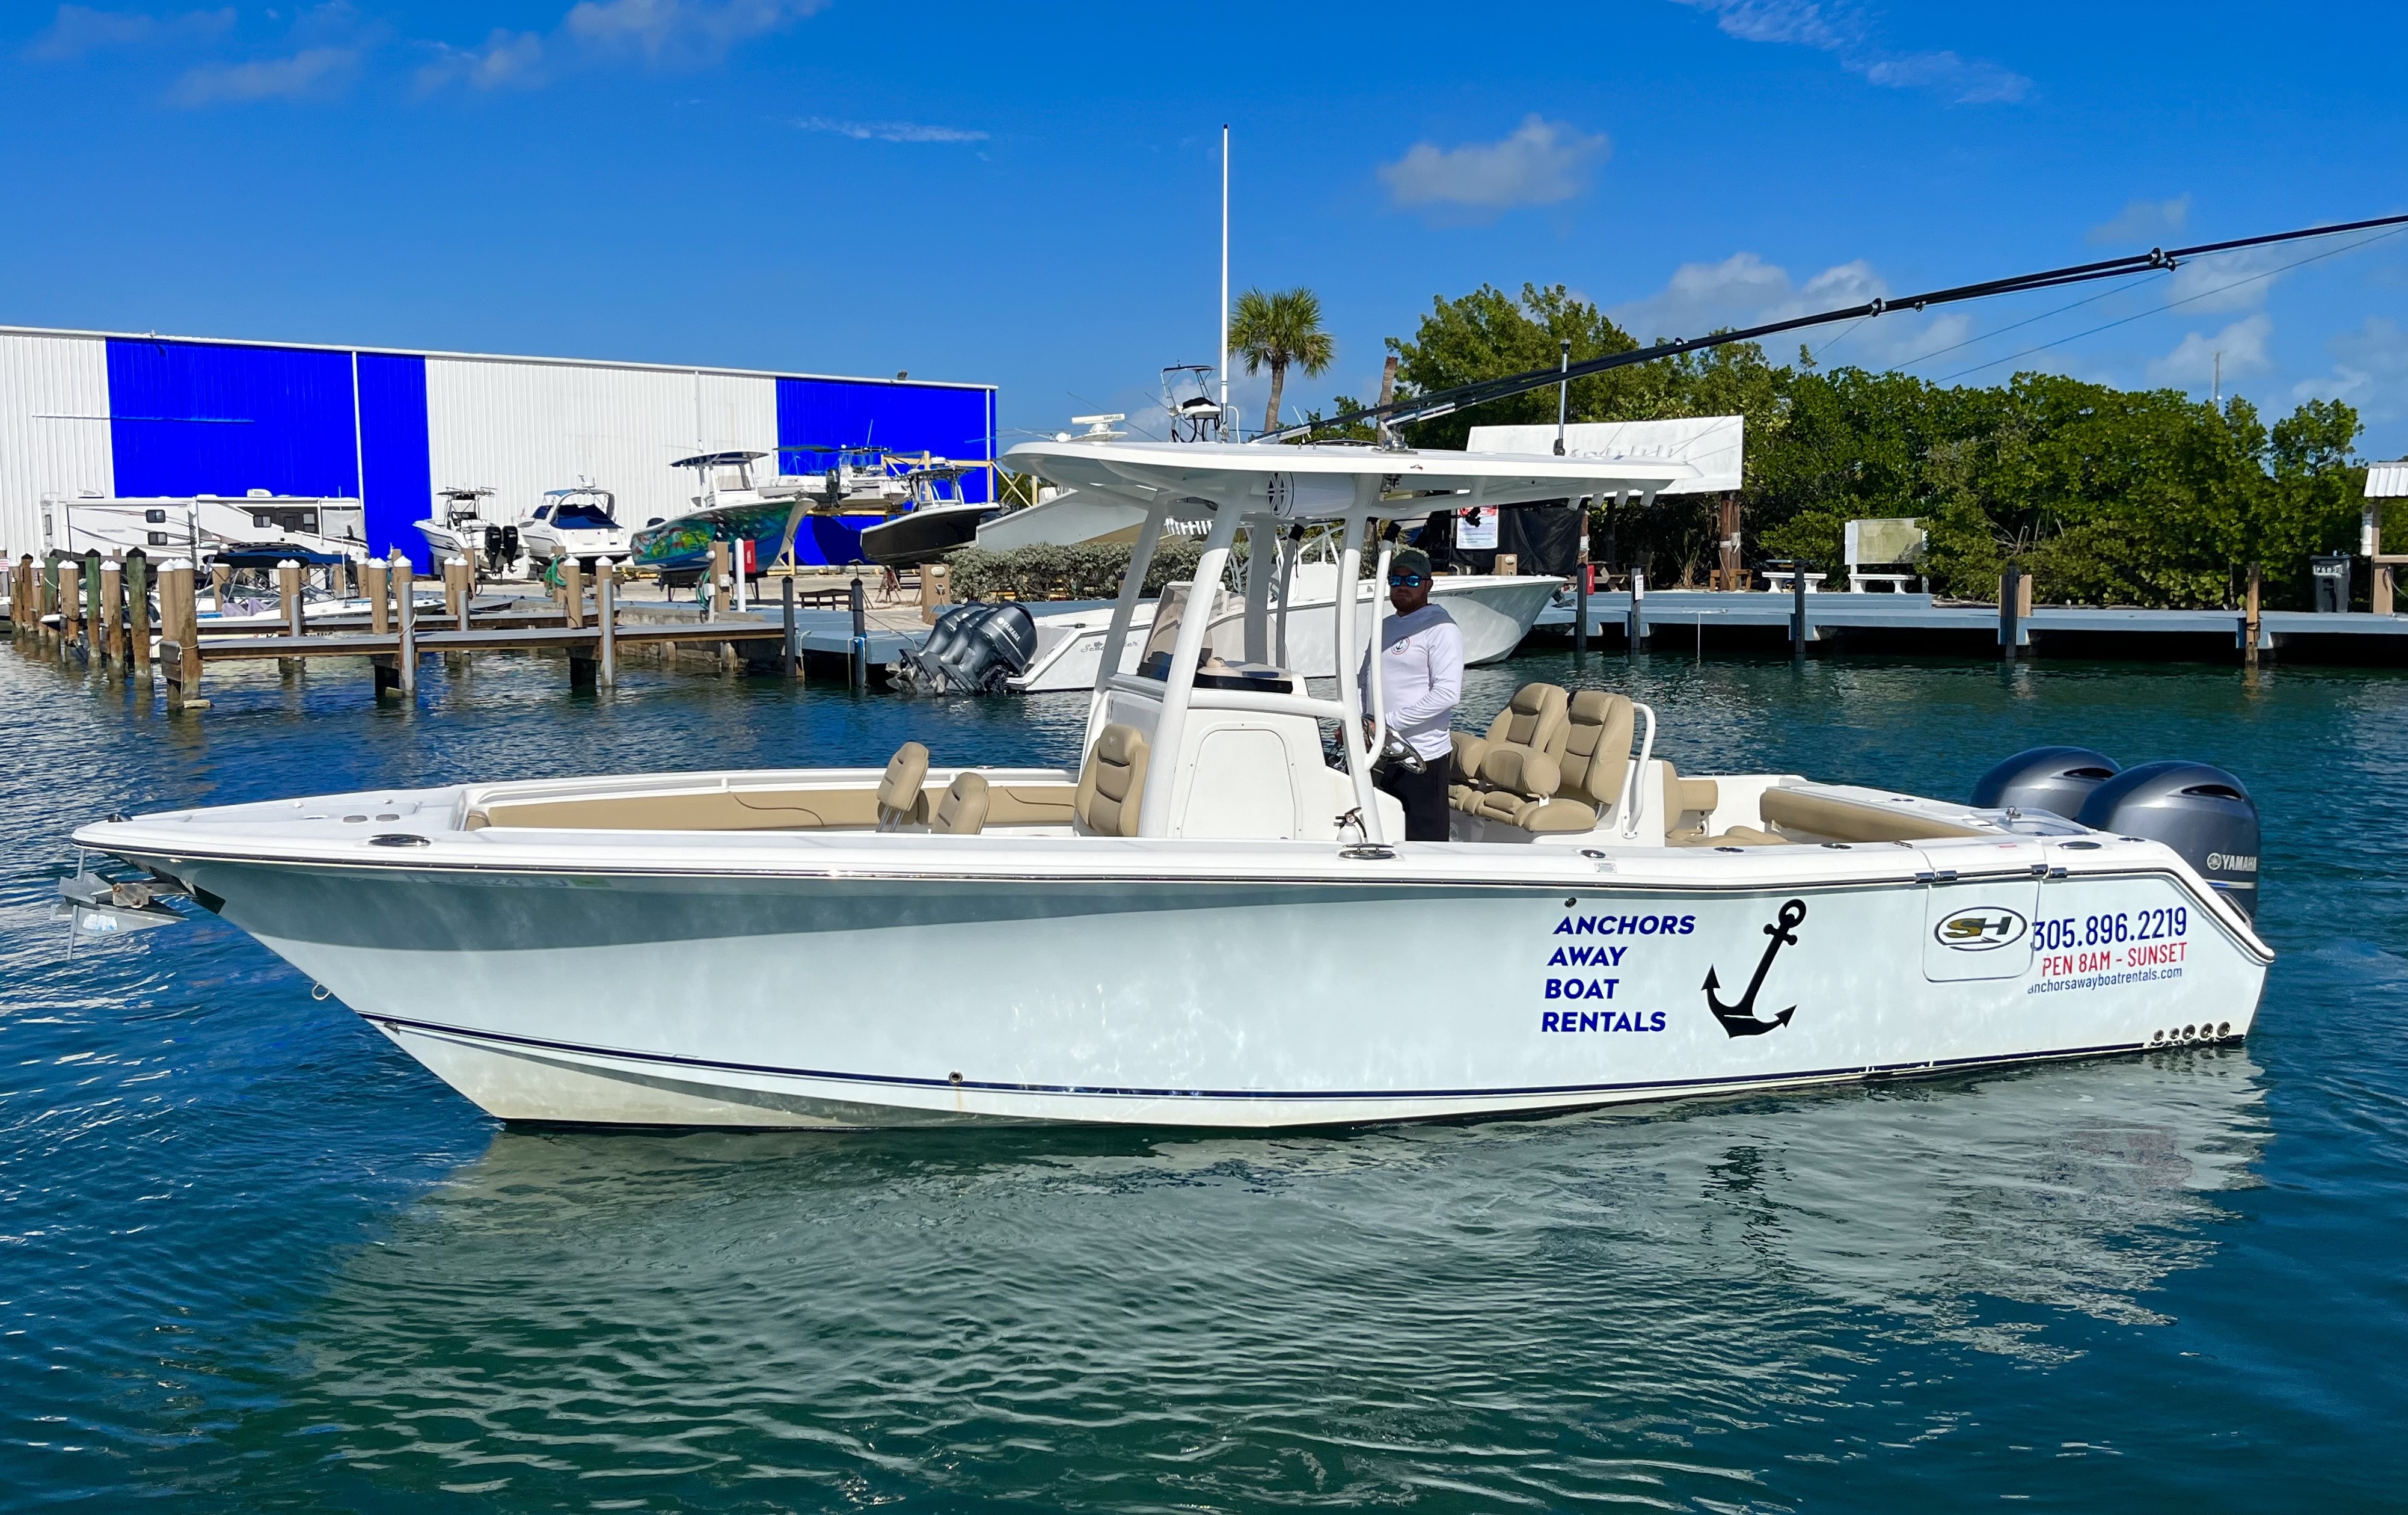 An image of Boat #25 - 27.5’ SEA HUNT GAMEFISH from Anchors Away Boat Rentals